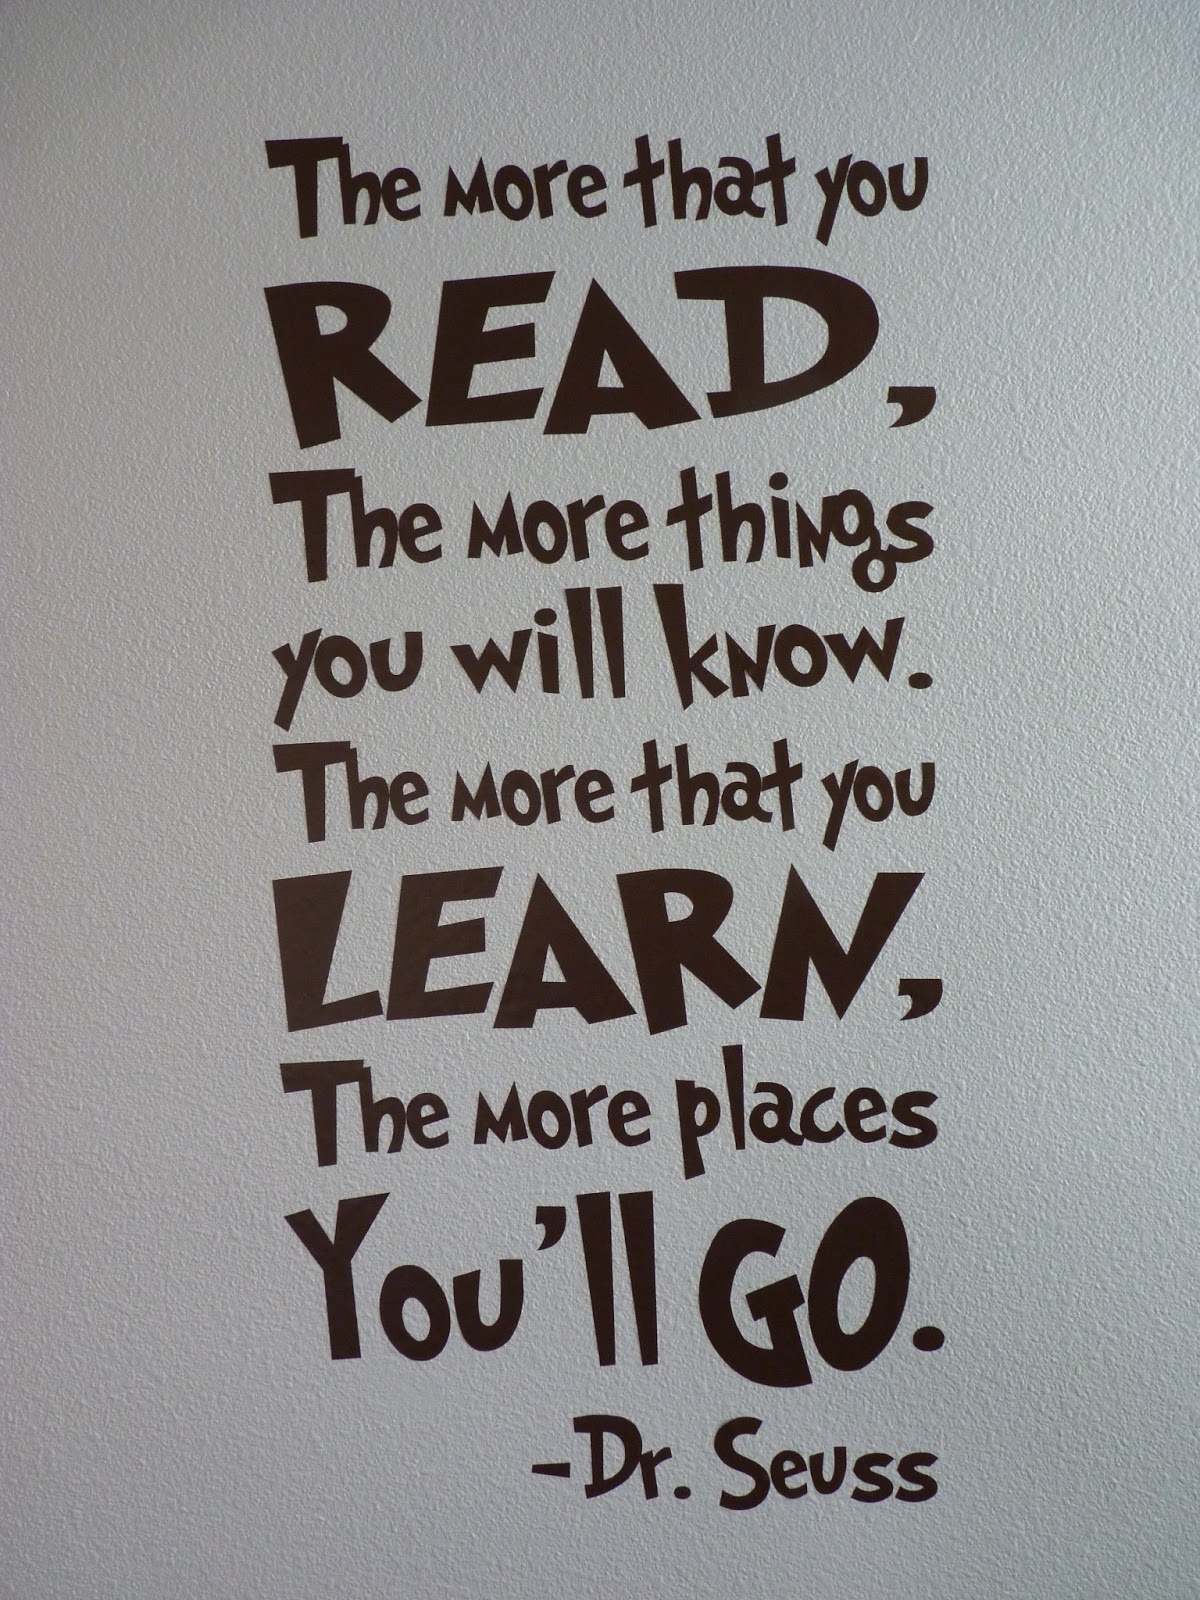 Good Quotes For Reading Reading Quotes Quote Good Bookmark Students Kids Library Sayings Read Children Improvements Use Quotesgram Seuss Dr Nightmare Sew Area Work